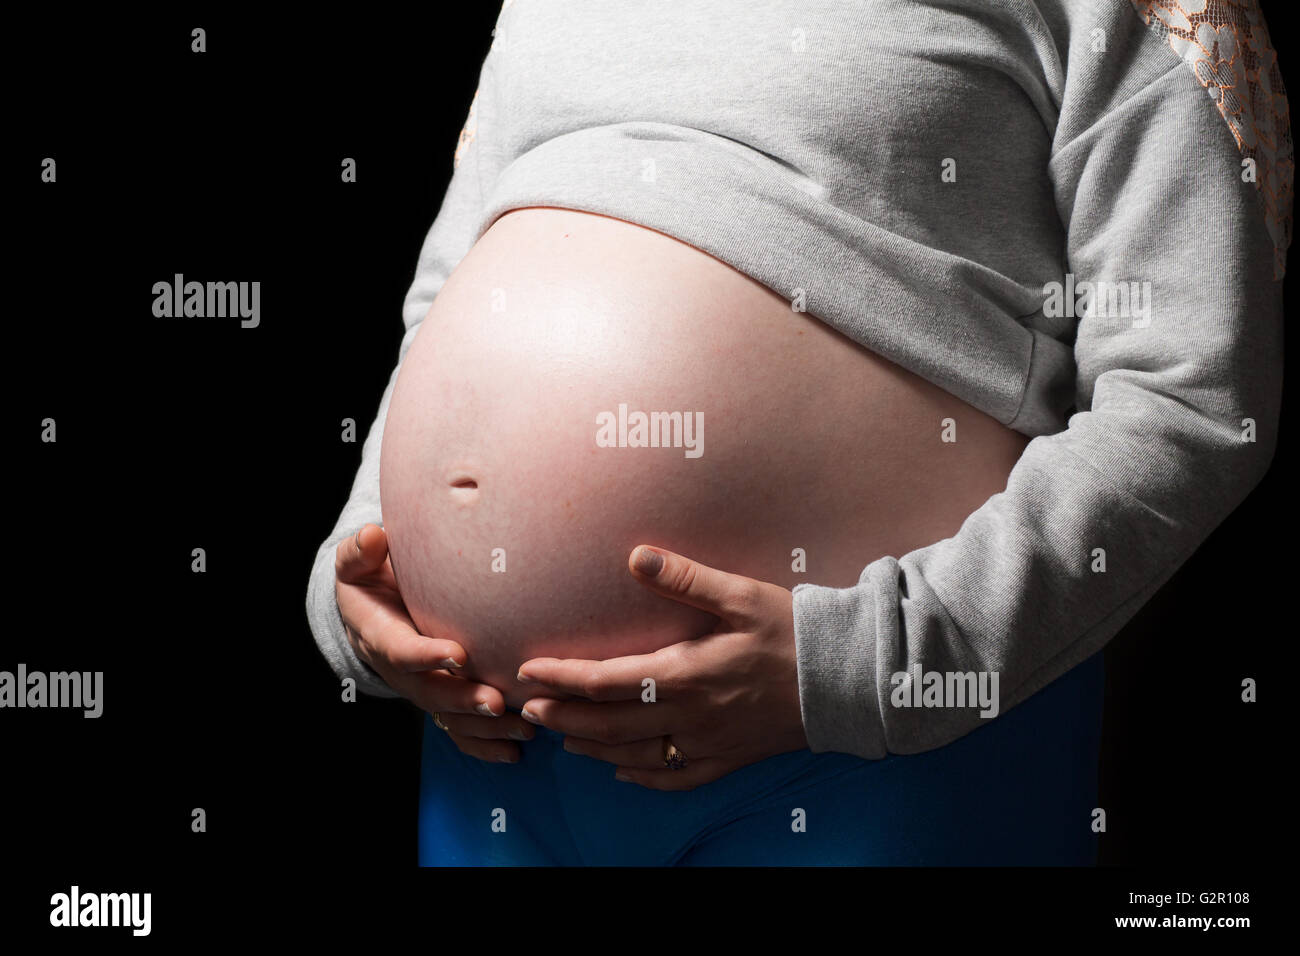 Close-up holding pregnant stomach, black isolated background. Stock Photo